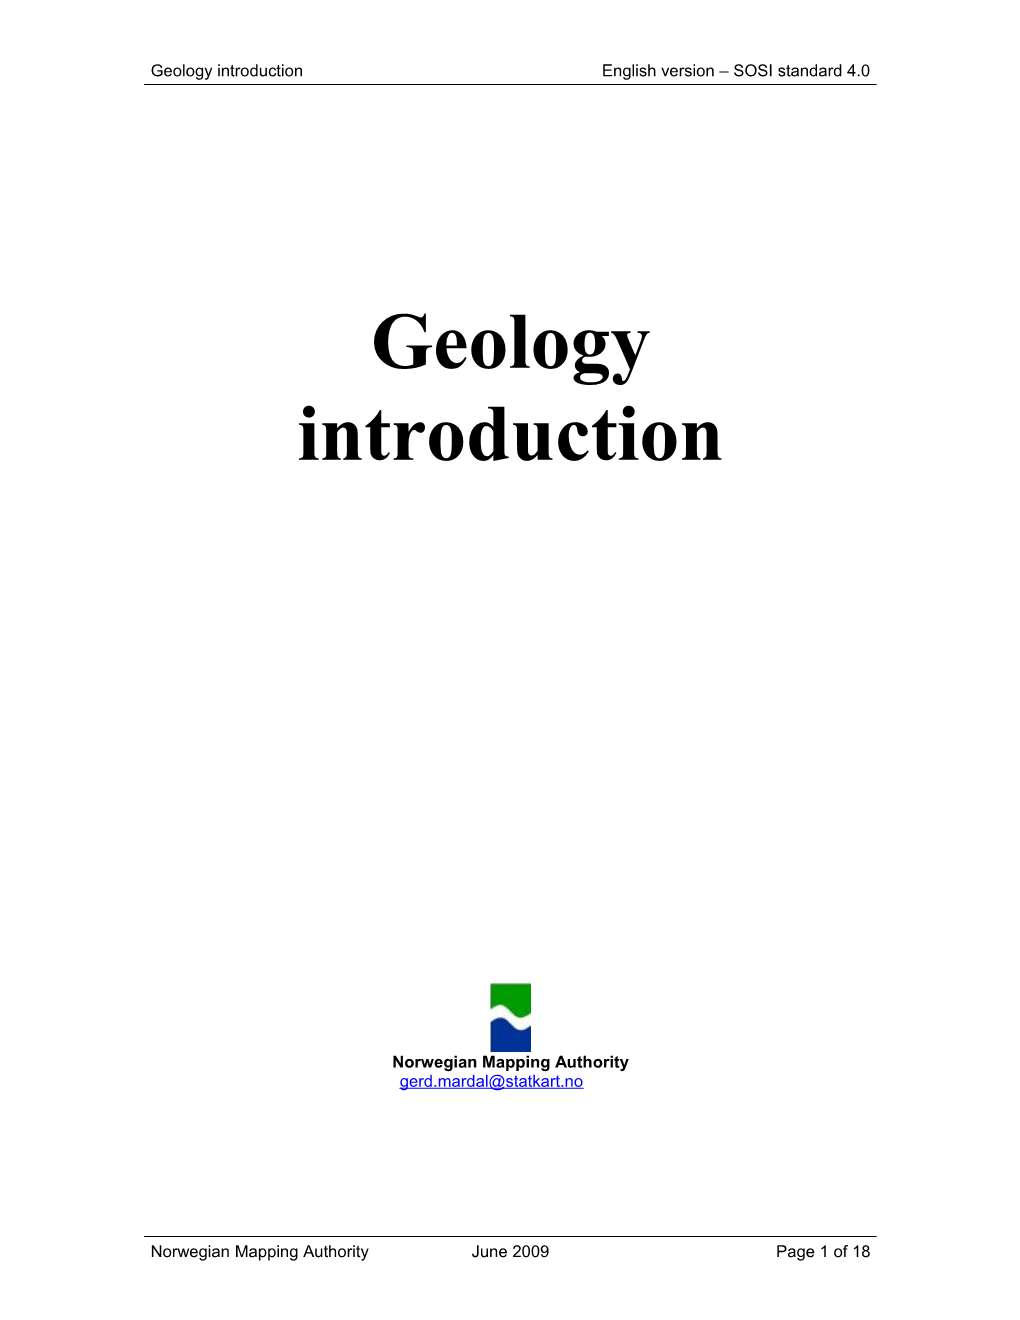 Geology Introduction